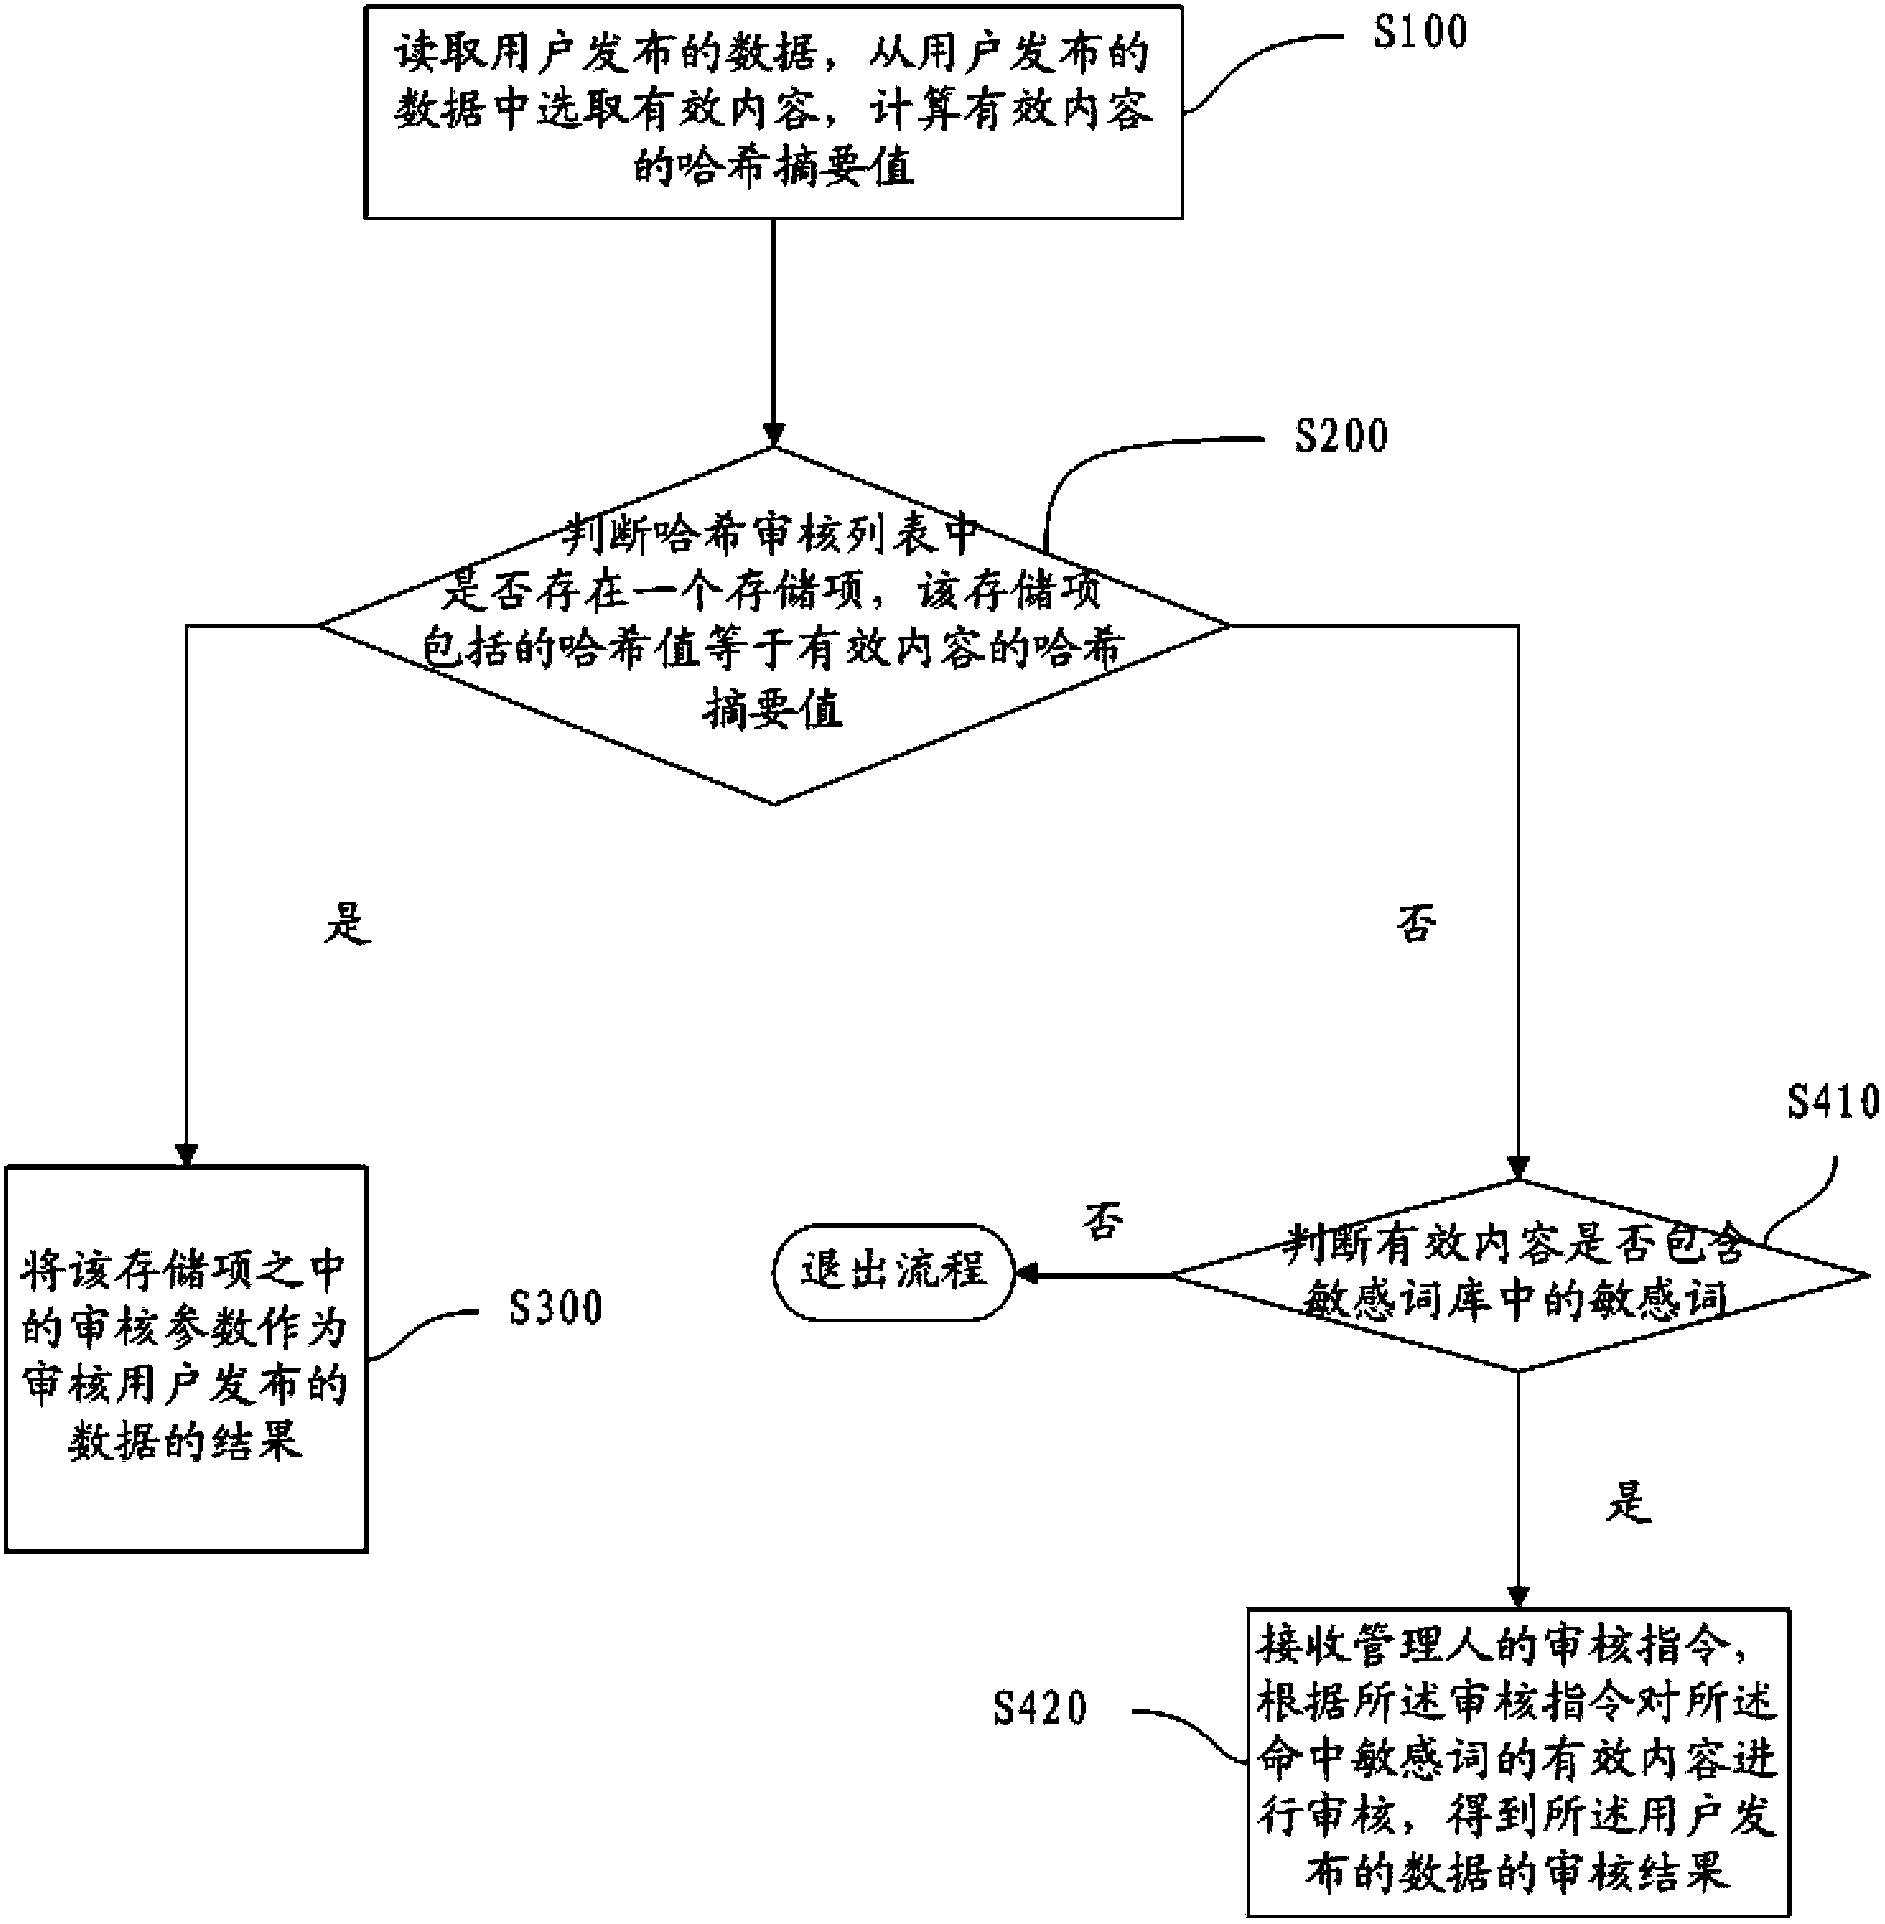 Content checking method and system